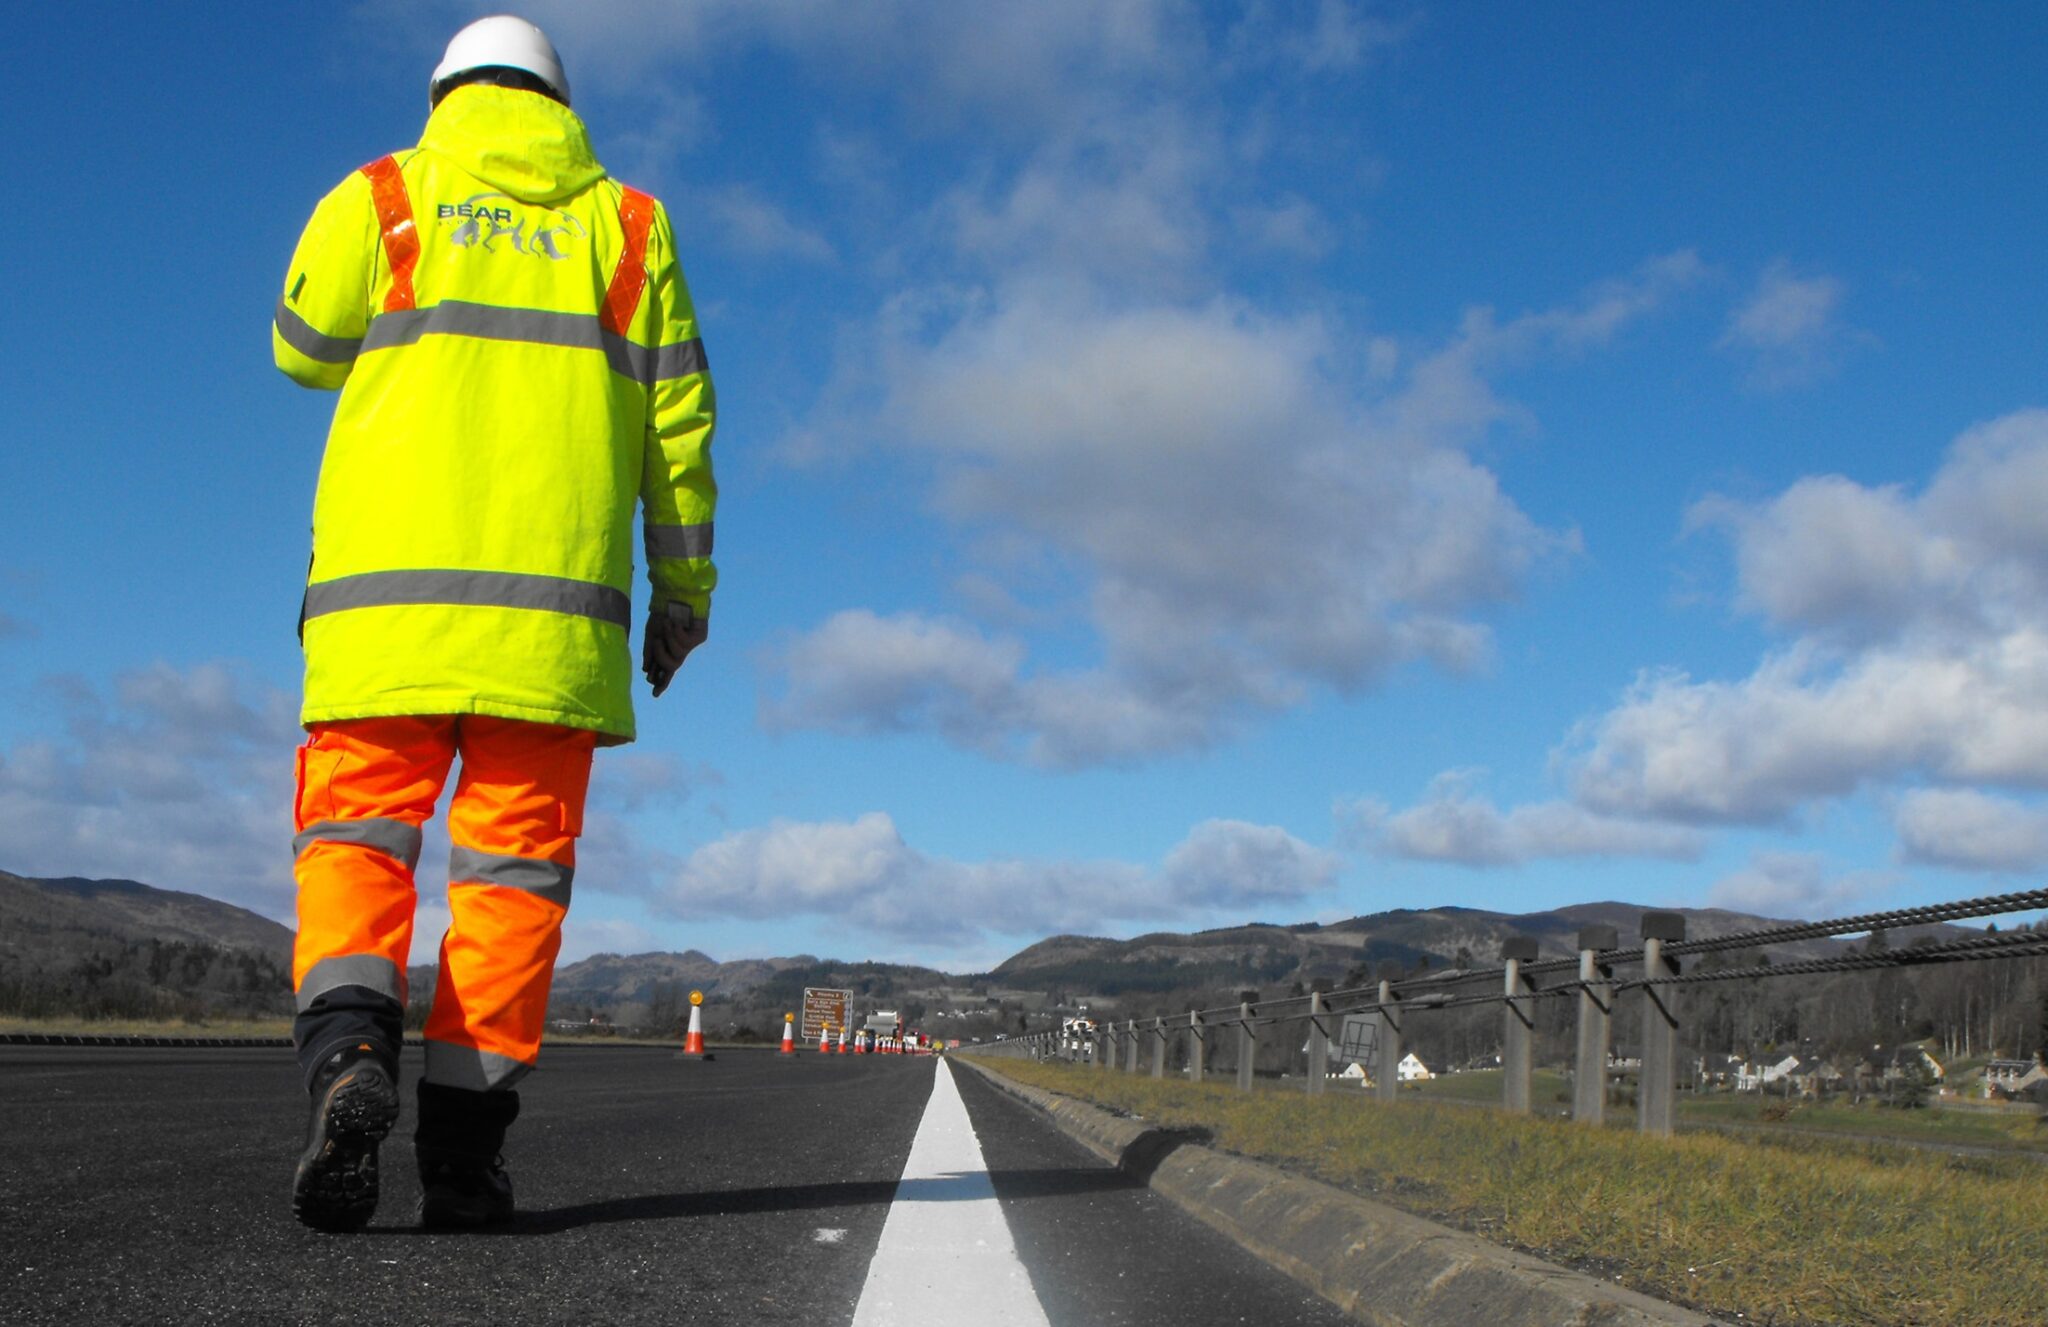 £100,000 SURFACING IMPROVEMENTS PLANNED FOR A887/A87 JUNCTION AT BUN LOYNE